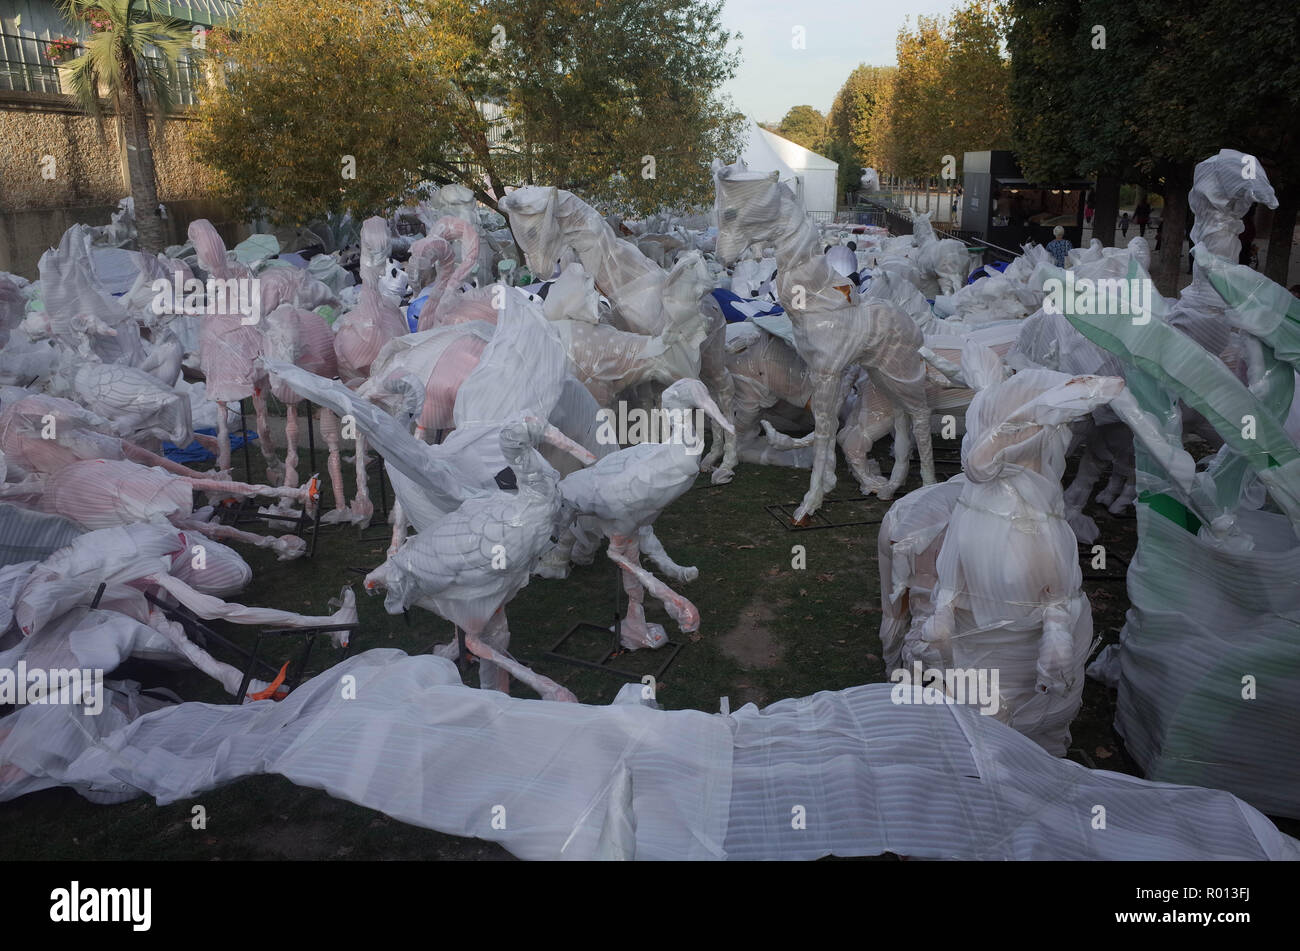 October 26, 2018 - Paris, France: Hundreds of animals made of plastics are being prepared for an illumination show in the Jardin des Plantes of the French National Museum of Natural History. The show is prepared by the Sichuan Tianyu company. Des centaines d'animaux en plastique sont en train d'etre prepares pour un spectacle d'illumination au Jardin des Plantes. Ces festival des lumieres est prepare par le groupe chinois Sichuan Tianyu. *** FRANCE OUT / NO SALES TO FRENCH MEDIA *** Stock Photo